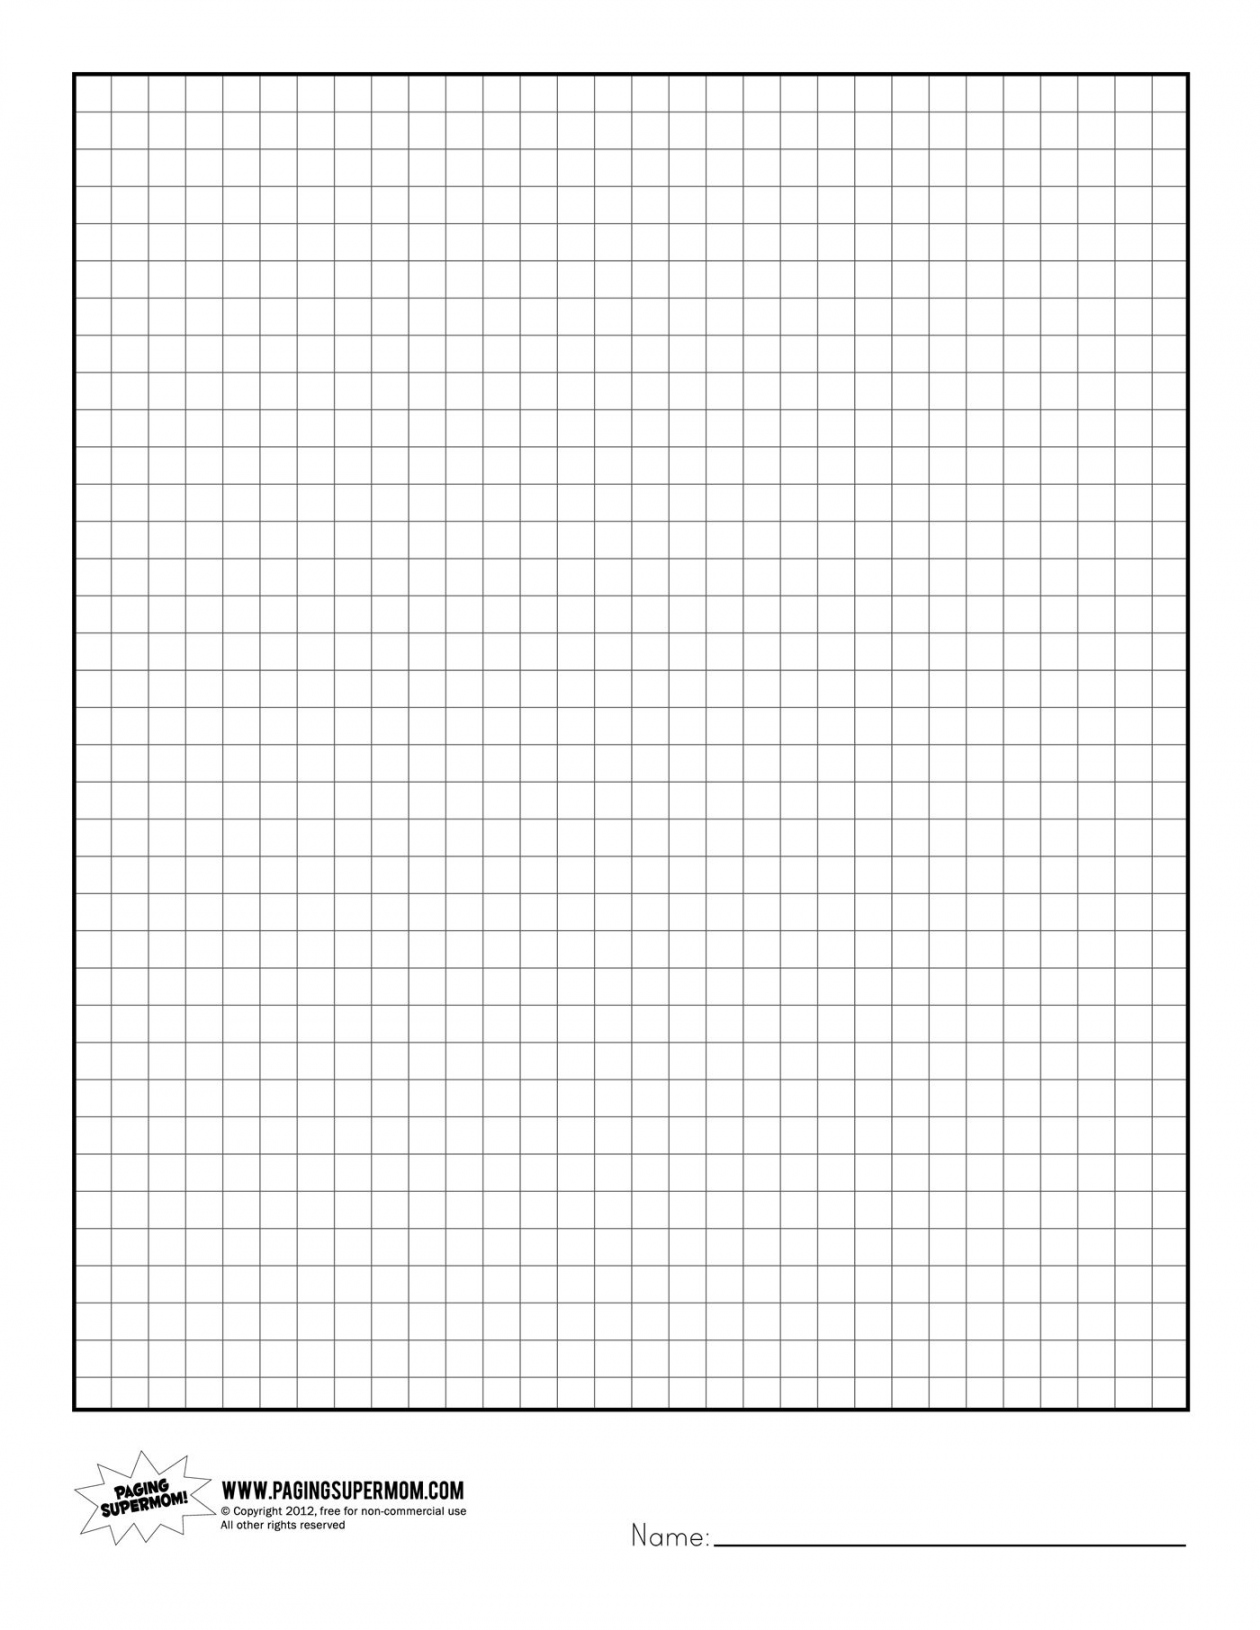 Pin on Healthy eating - FREE Printables - Graph Paper Printable Free